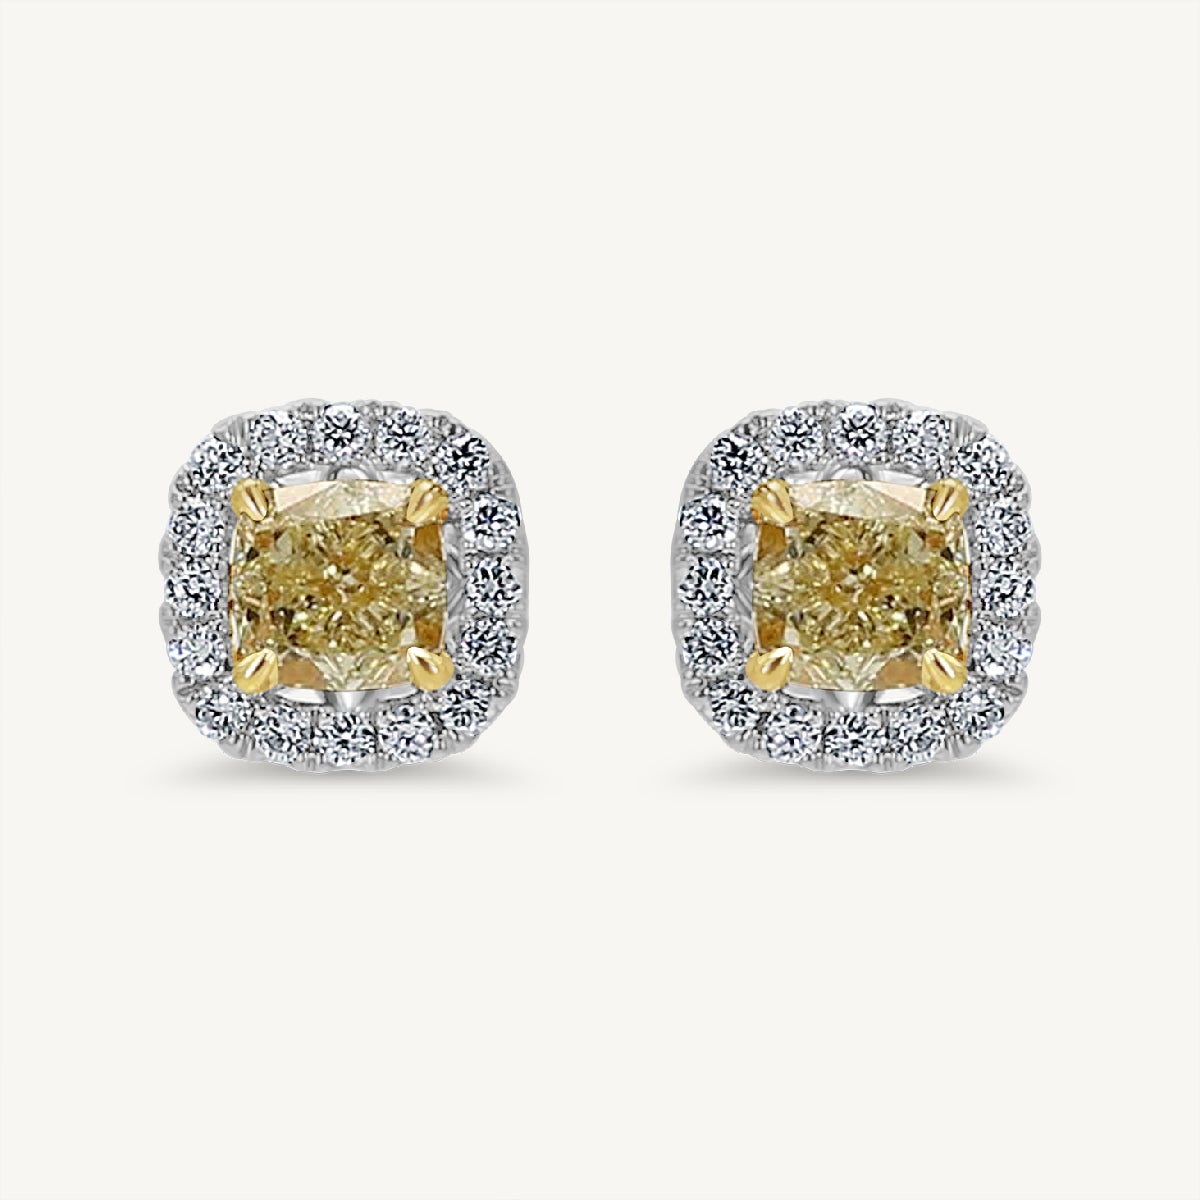 Natural Yellow Cushions and White Diamond 1.72 Carat TW Gold Stud Earrings